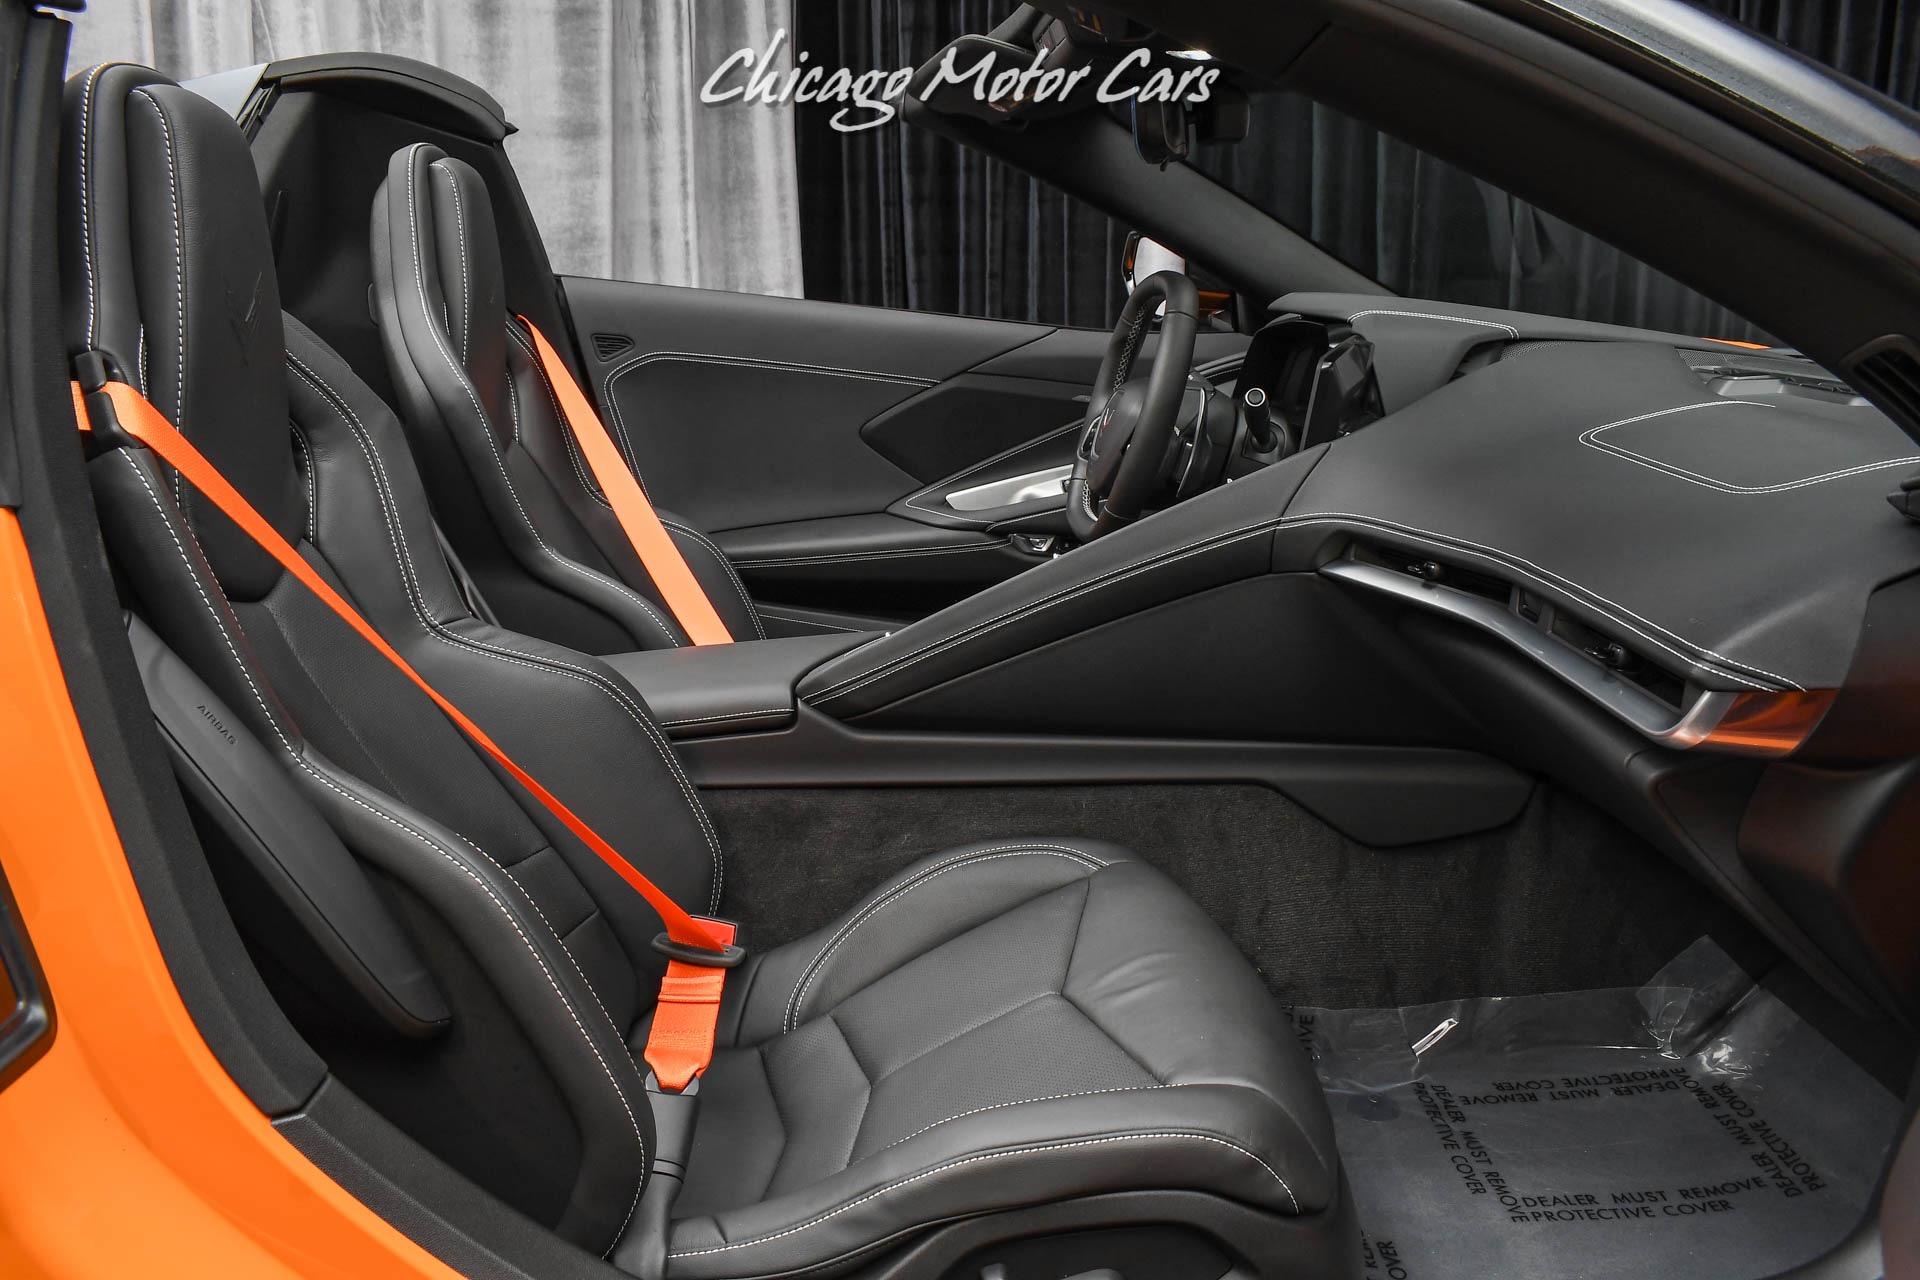 Used-2022-Chevrolet-Corvette-Stingray-Convertible-ONLY-397-Miles-Amplify-Orange-Perf-Exhaust-LOADED